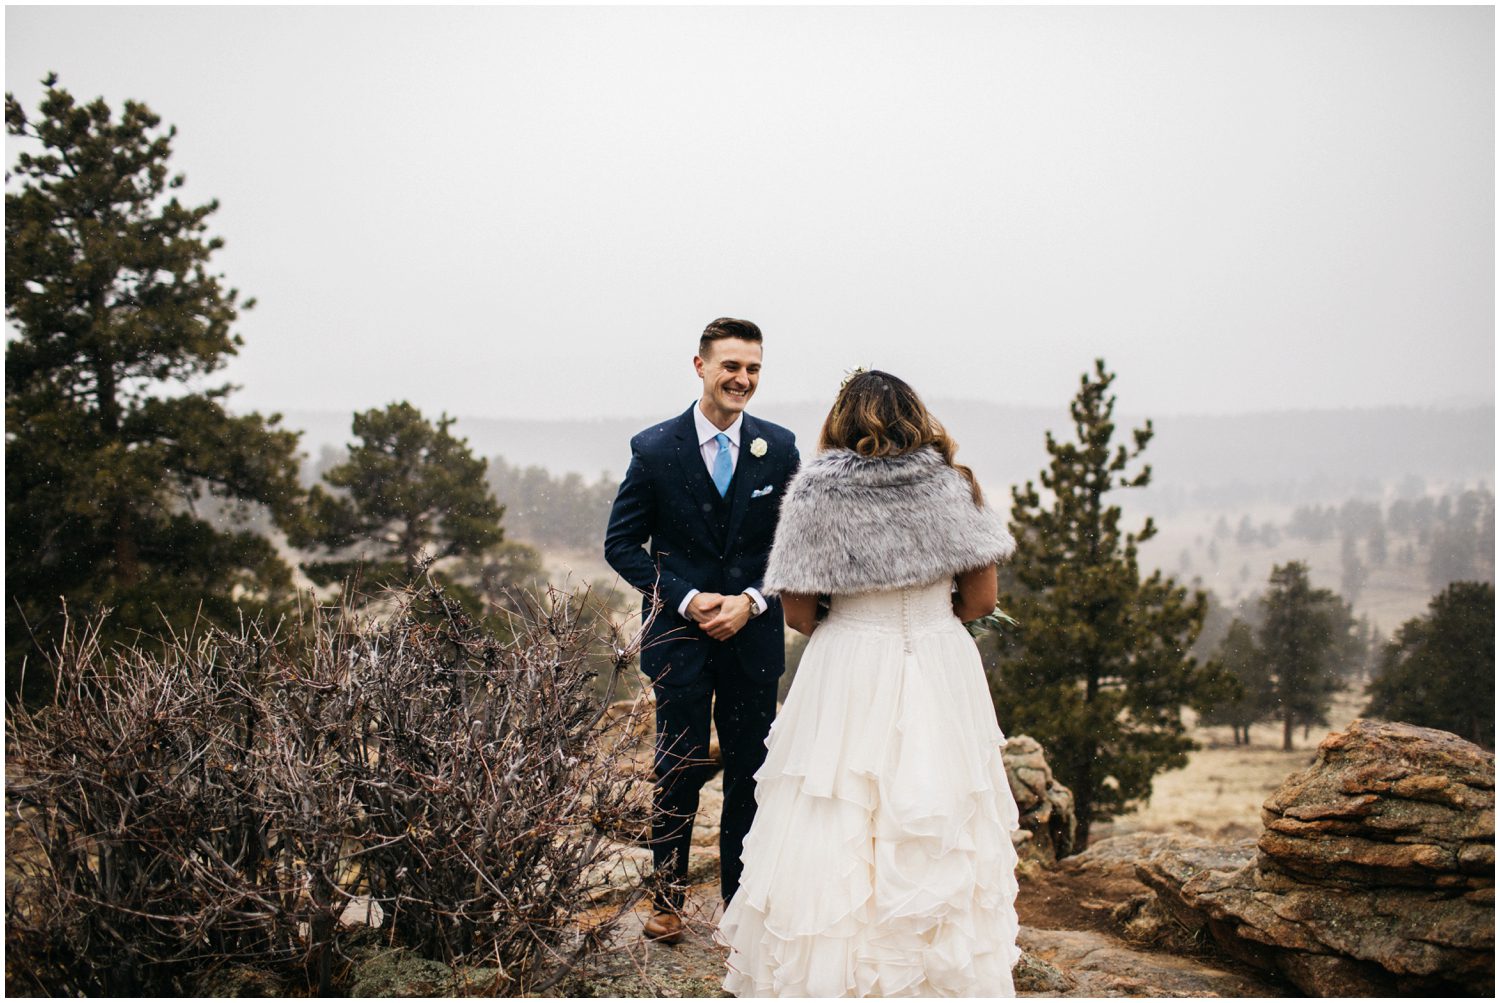 Wedding first look, Groom first look, Bride and groom first look, Colorado Elopement Photographer, Rocky Mountain National Park Elopement, Estes Park Elopement, 3M Curve Elopement, Colorado Elopement Photos, Elope in Colorado, Adventure Wedding in Colorado, Adventurous Wedding Photographer, Colorado Winter Wedding, Colorado Wedding Locations, Colorado Elopement Locations, Adventure Elopement, Elopement Photographer, Destination Elopement, Mountain Elopement, Elopement Ideas